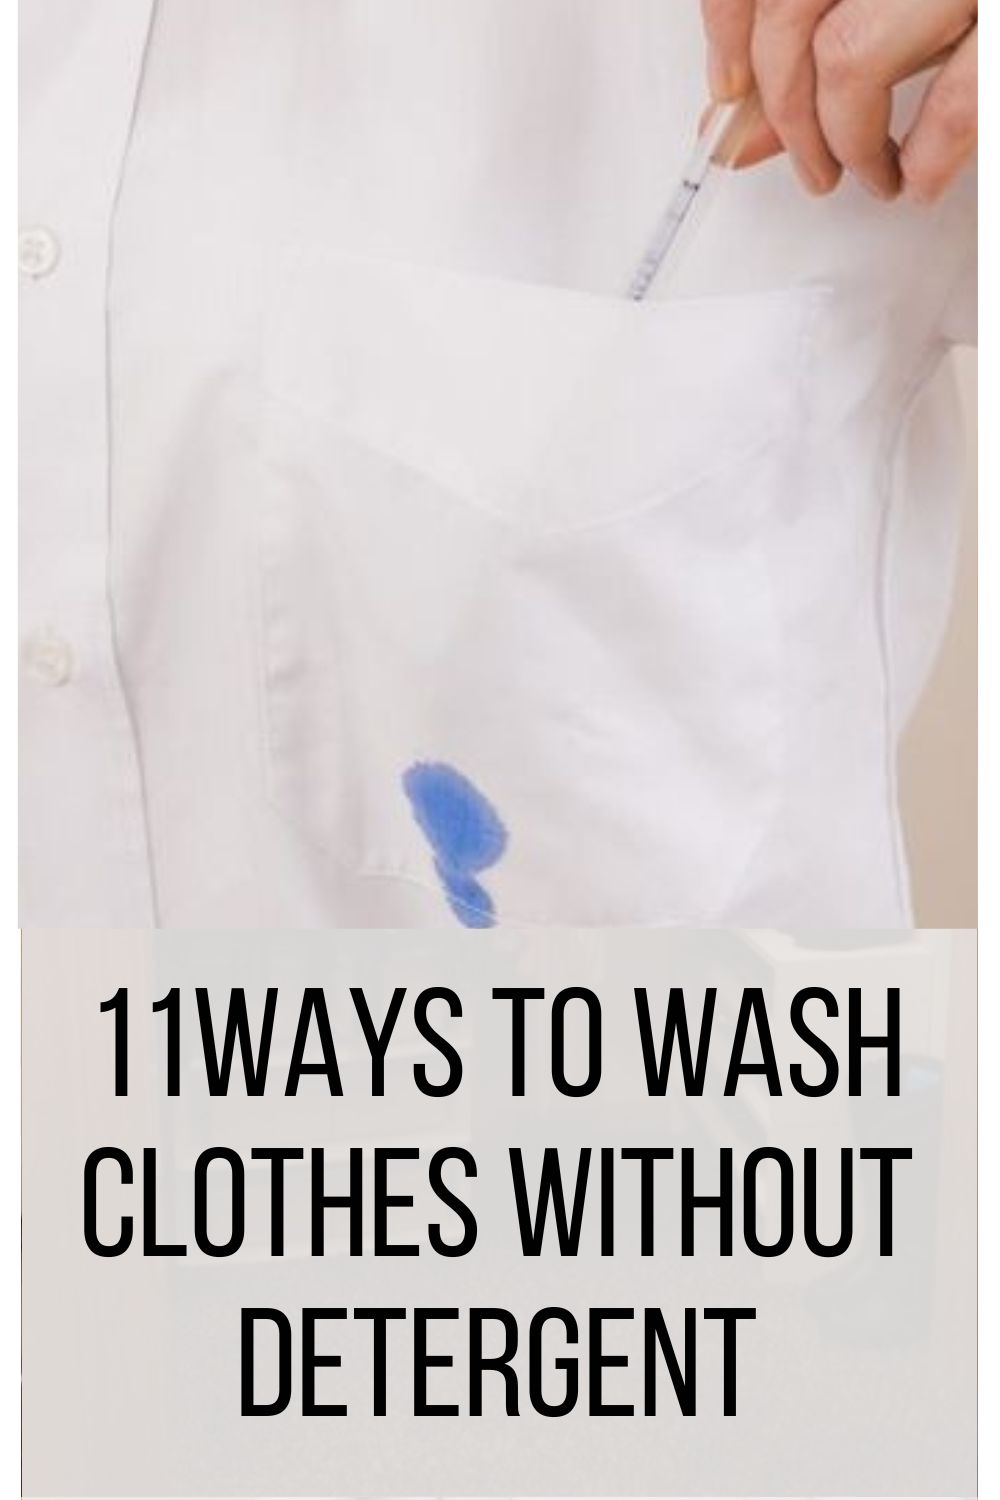 Does Acetone Stain Clothes